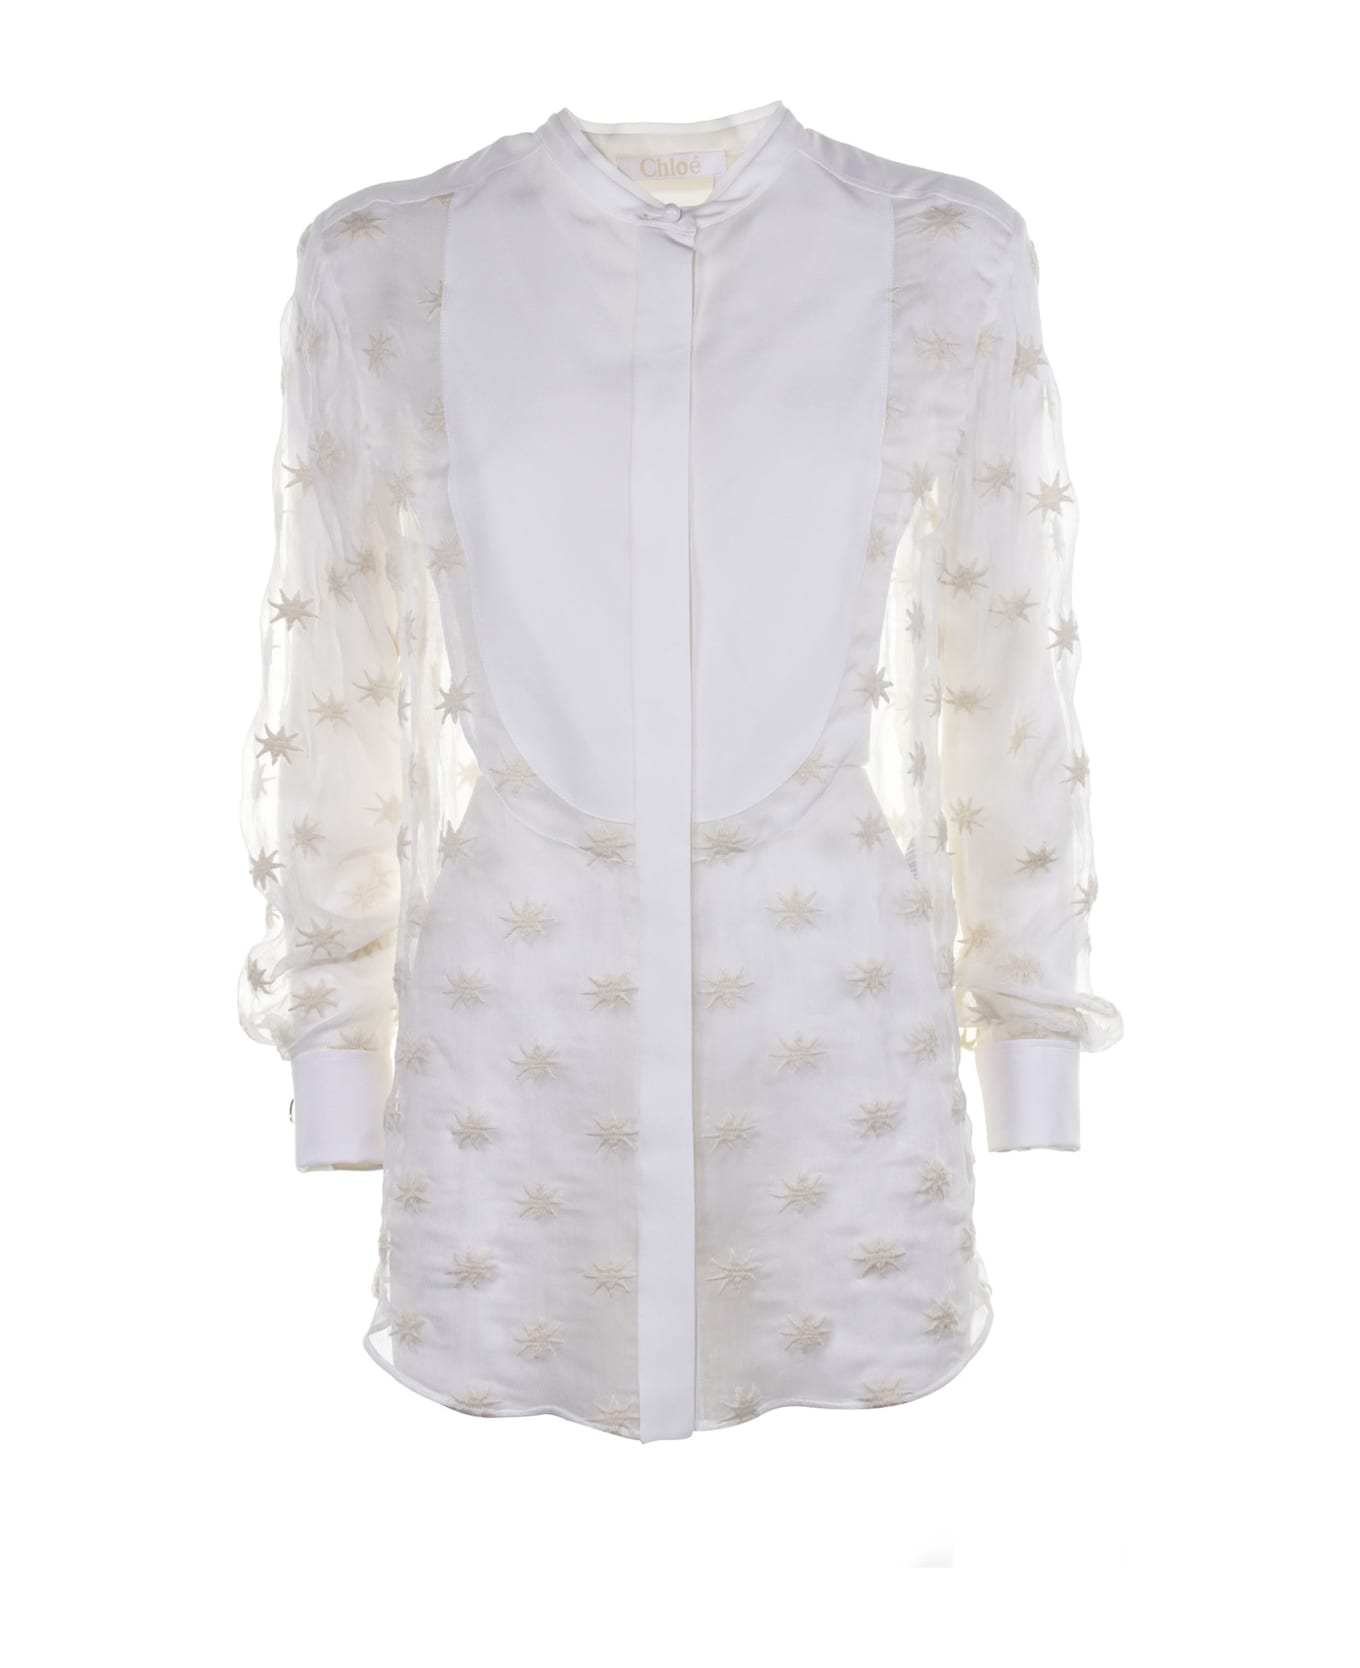 Chloé Shirt Crafted In Ivory Silk Mousseline - ICONIC MILK